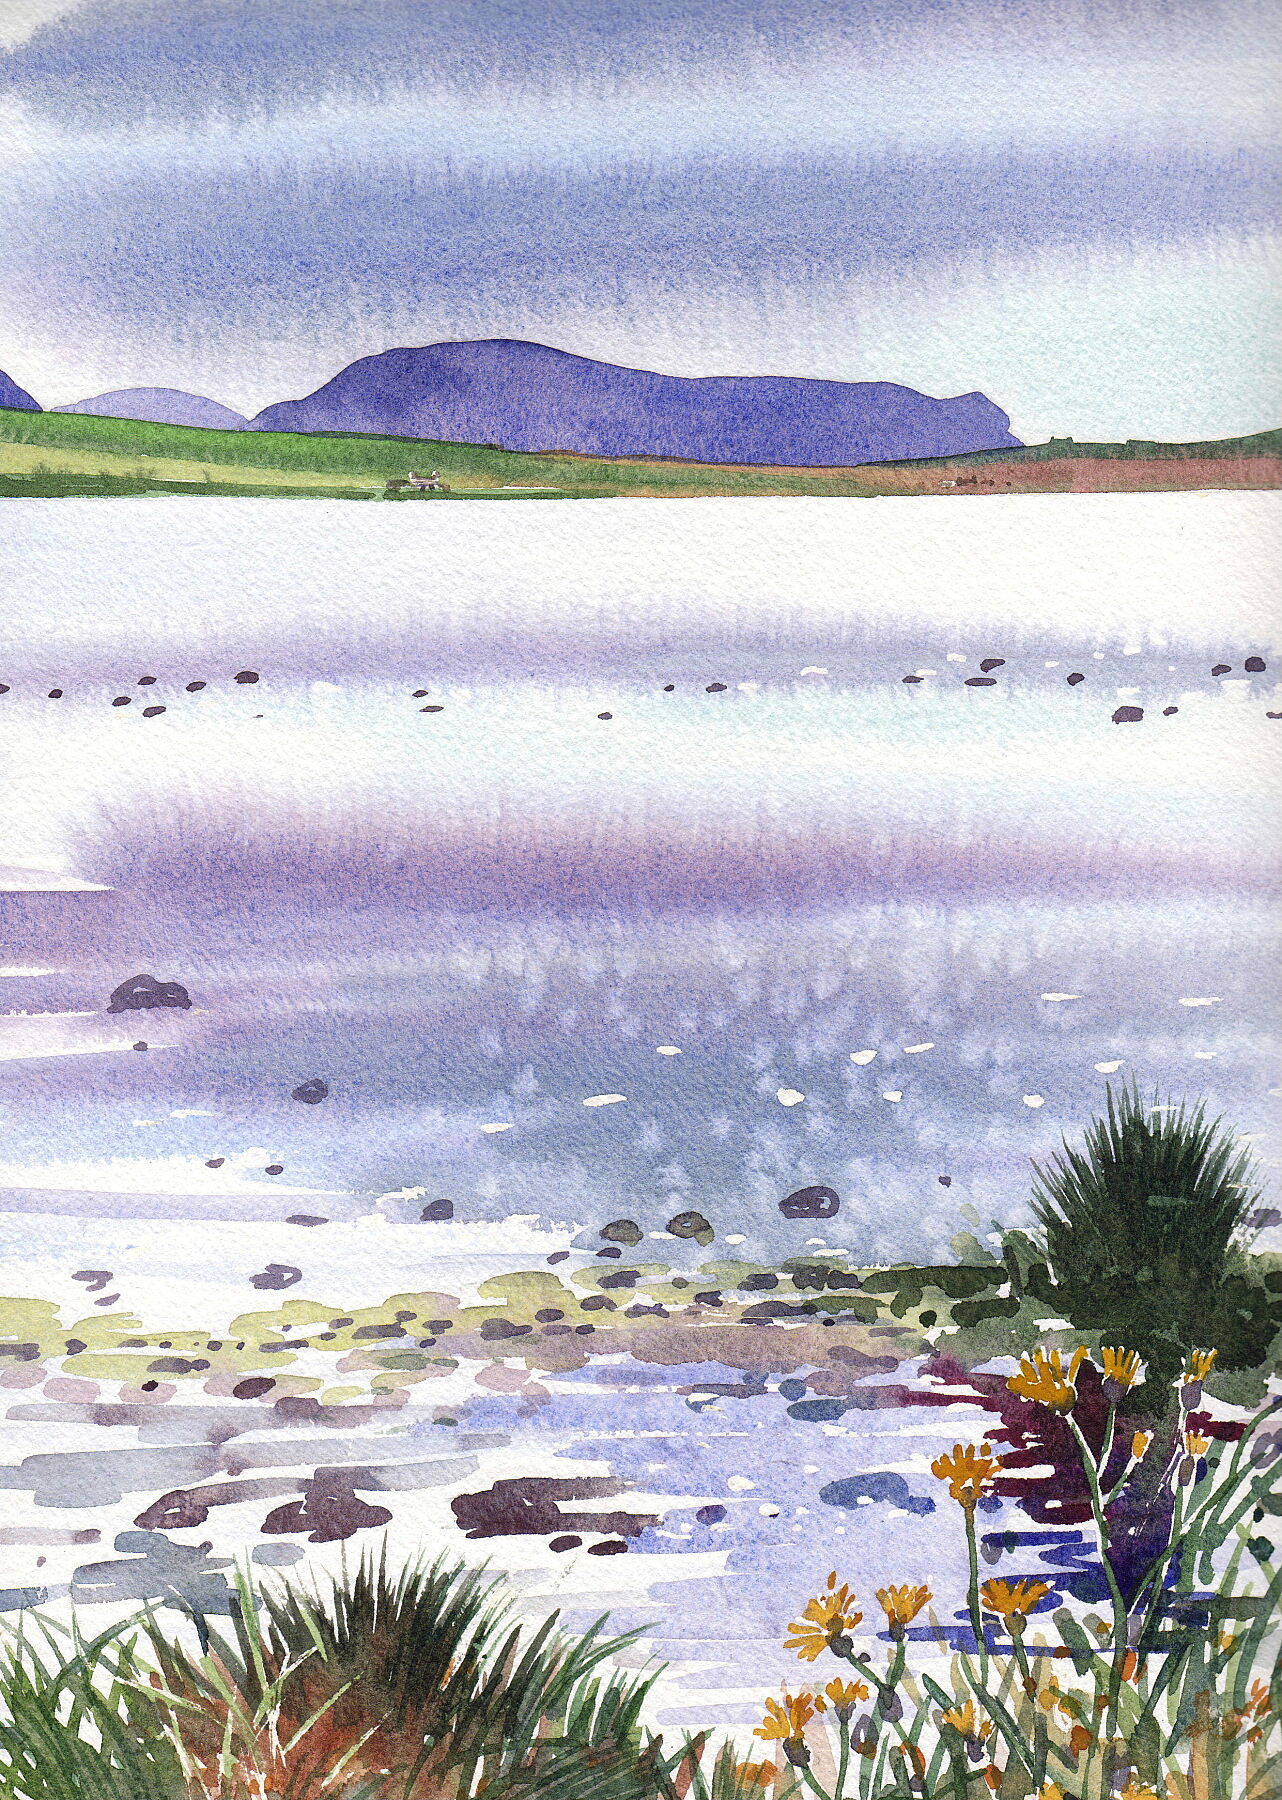 A watercolour painting by artist Jane Glue from Orkney, Scotland showing Stenness loch with the Hoy Hills in the background.